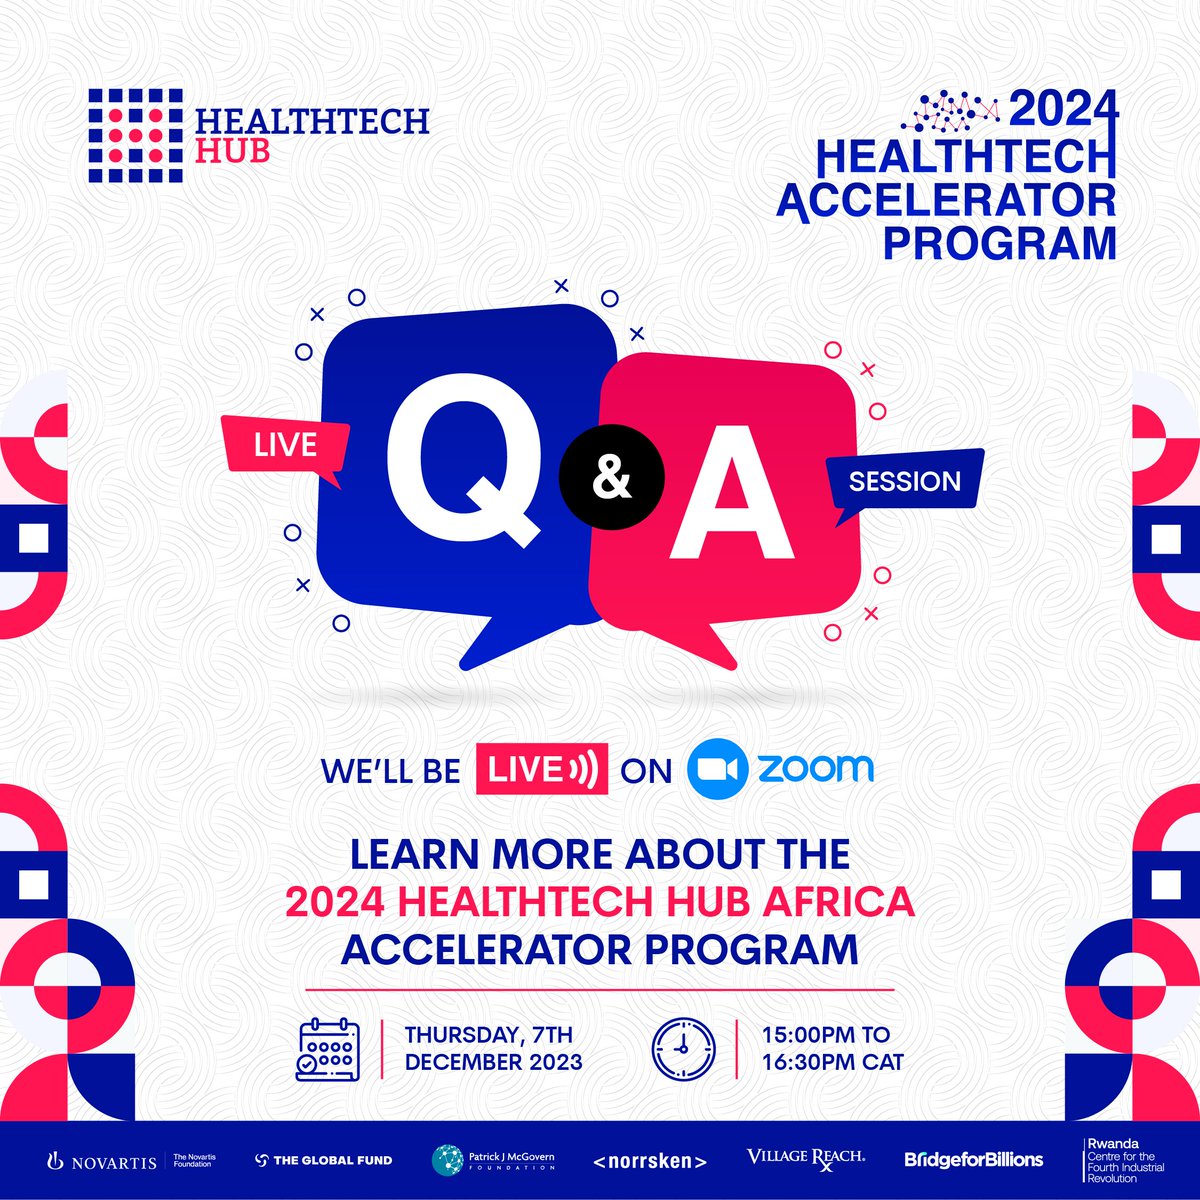 Have you registered yet? The webinar is scheduled for today at 15:00 CAT. To register for the webinar, click on the link provided. Upon completion, you will receive a confirmation email. Looking forward to your active participation! bit.ly/3uBiwGU #HTHA2024 #Webinar